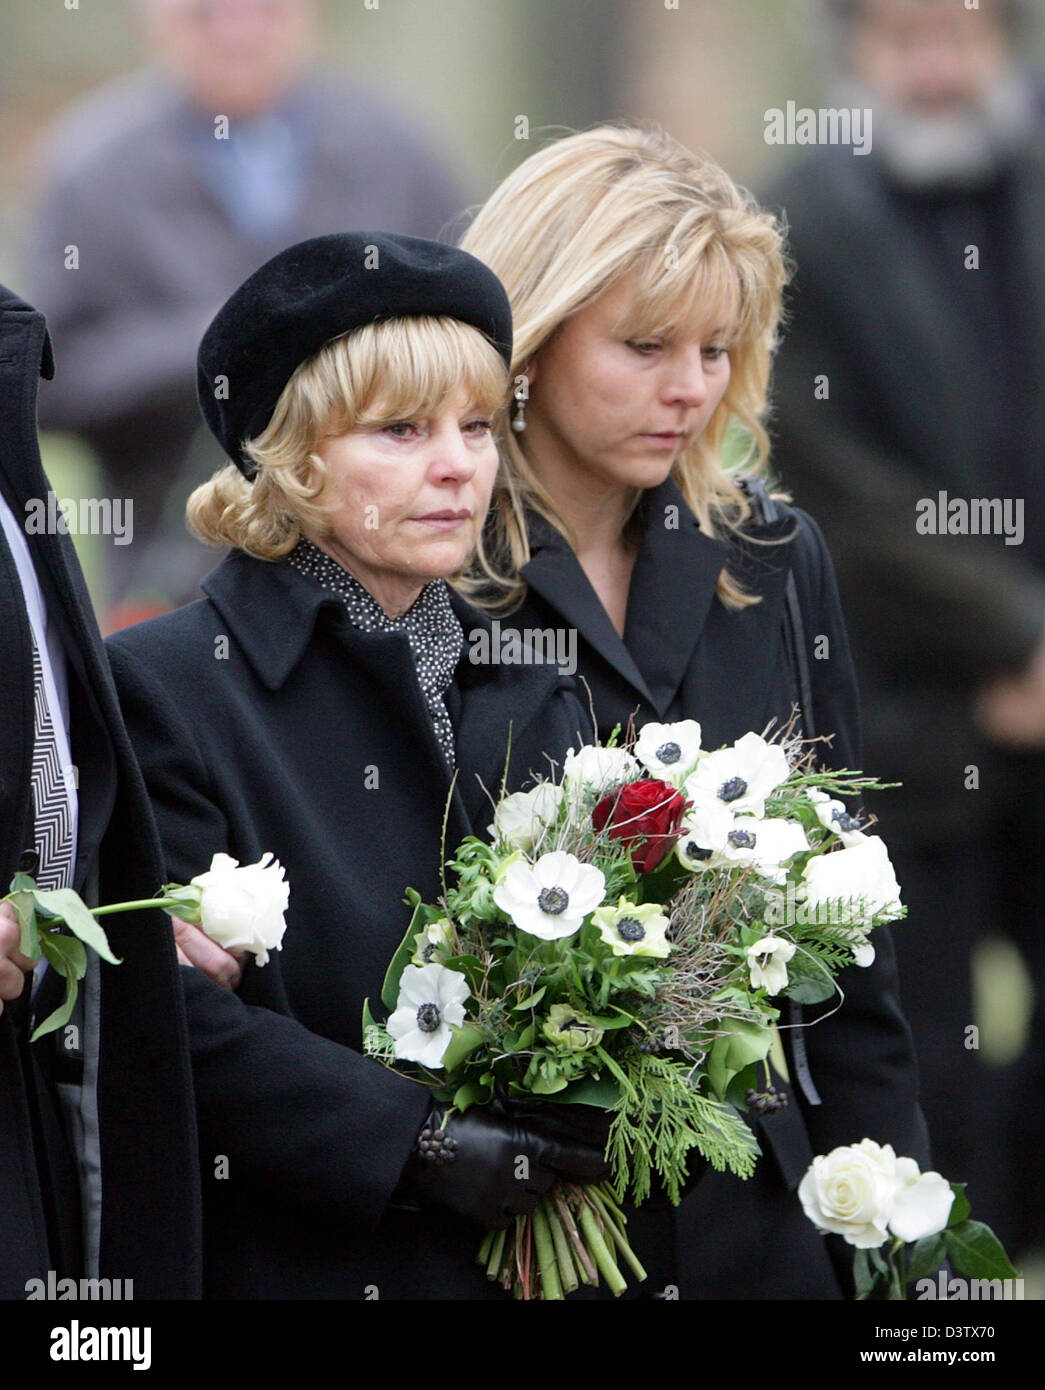 The widow of former GDR espionage governor Markus Wolf, Andrea Wolf (L) and her daughter (R) stand at his grave in Berlin, Germany, Saturday, 25 November 2006. Wolf died on 9 November 2006, a special date in Germany, aged 83. Hundreds of people followed the funeral procession of Wolf, who was over 30 years responsible for 4,000 GDR exterior agents in the Cold War. Photo: Gero Brelo Stock Photo